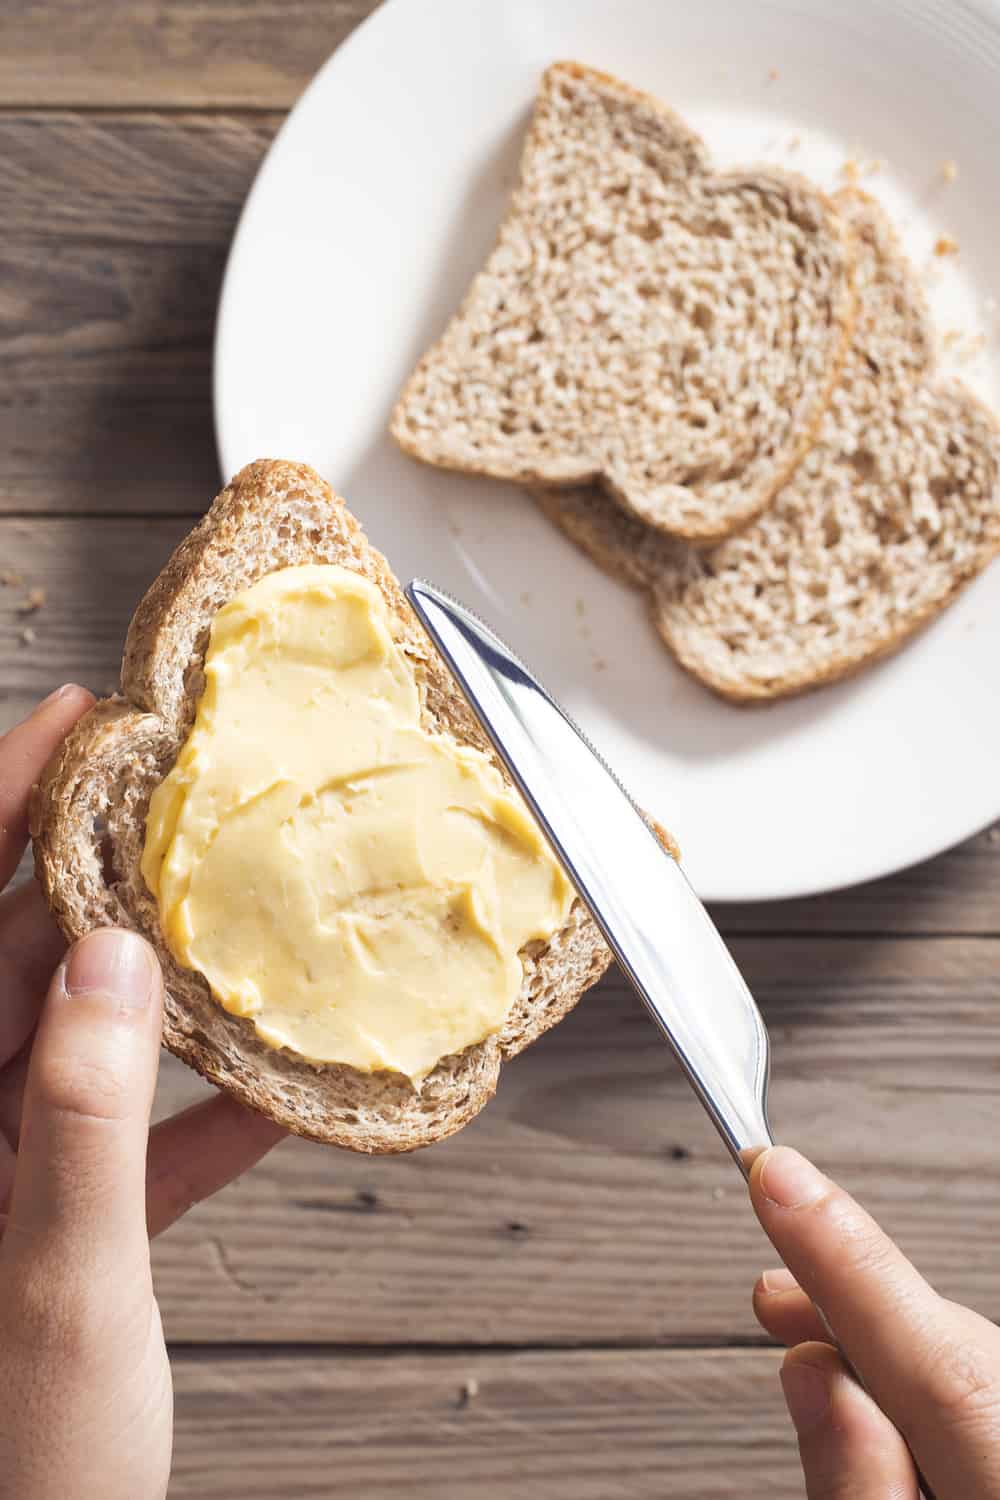 The Risks of Consuming Expired Margarine